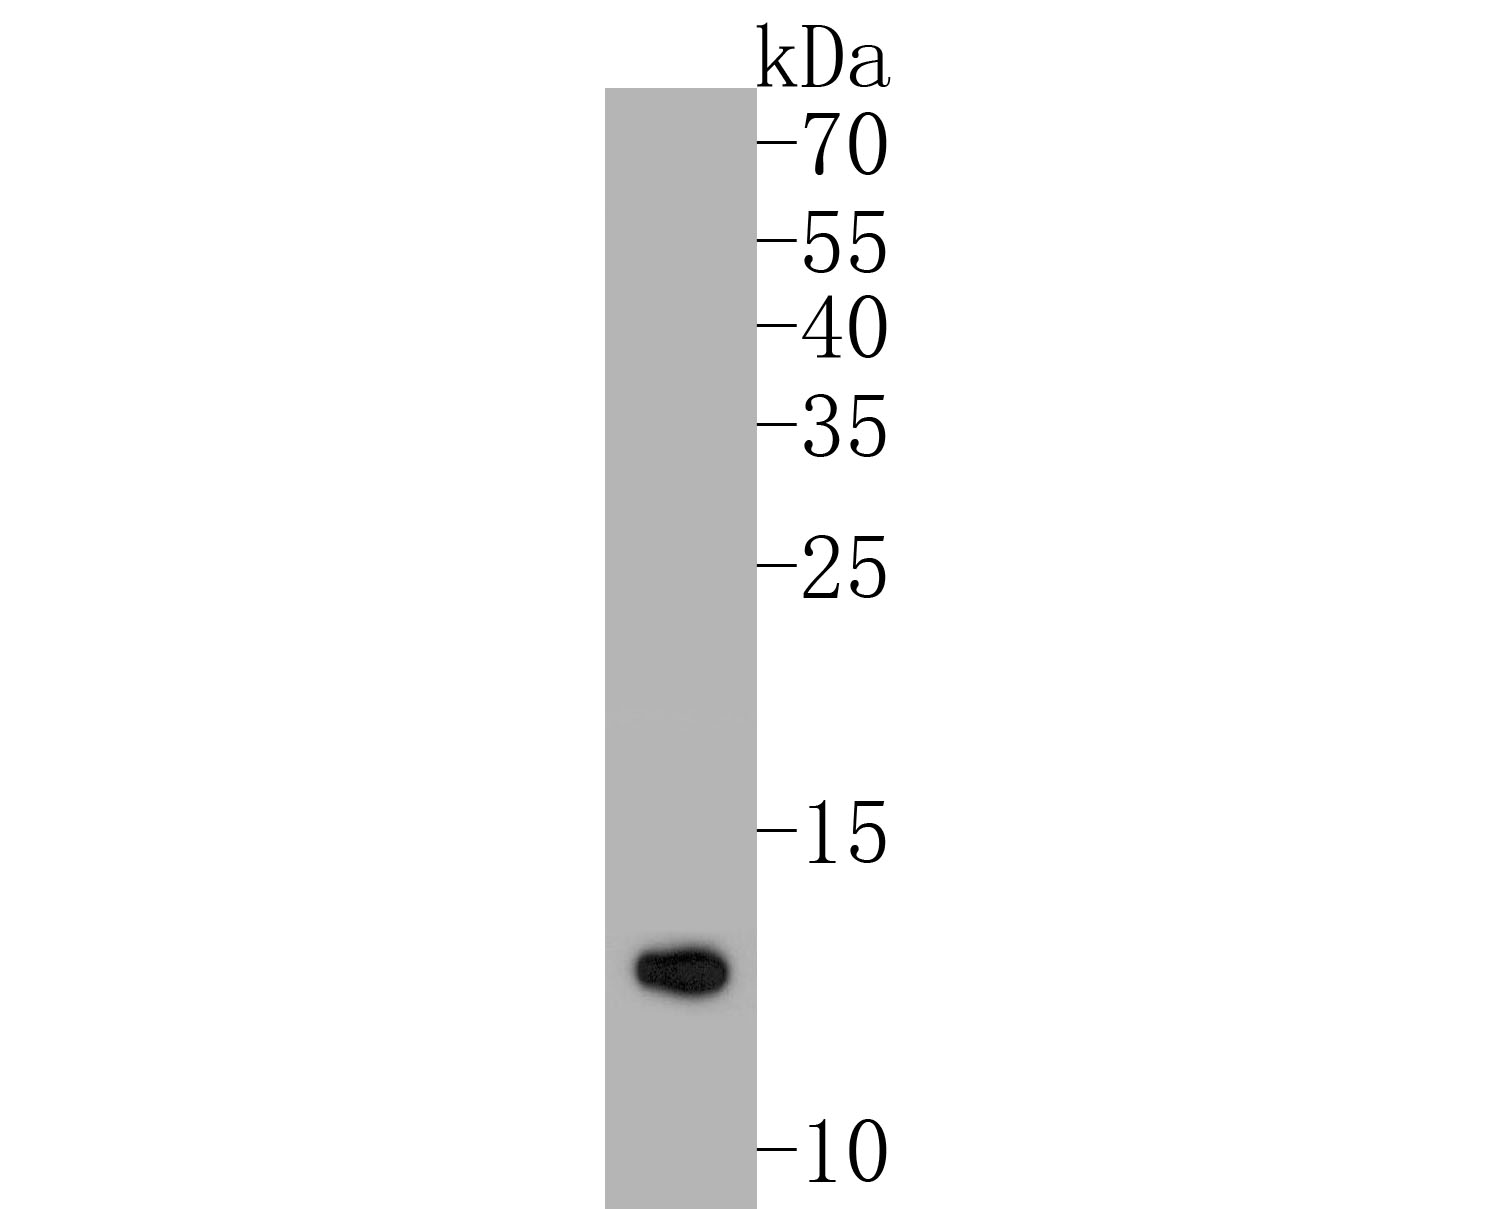 Western blot analysis of COX5B on 293 cell lysates. Proteins were transferred to a PVDF membrane and blocked with 5% BSA in PBS for 1 hour at room temperature. The primary antibody (ER1902-87, 1/500) was used in 5% BSA at room temperature for 2 hours. Goat Anti-Rabbit IgG - HRP Secondary Antibody (HA1001) at 1:5,000 dilution was used for 1 hour at room temperature.